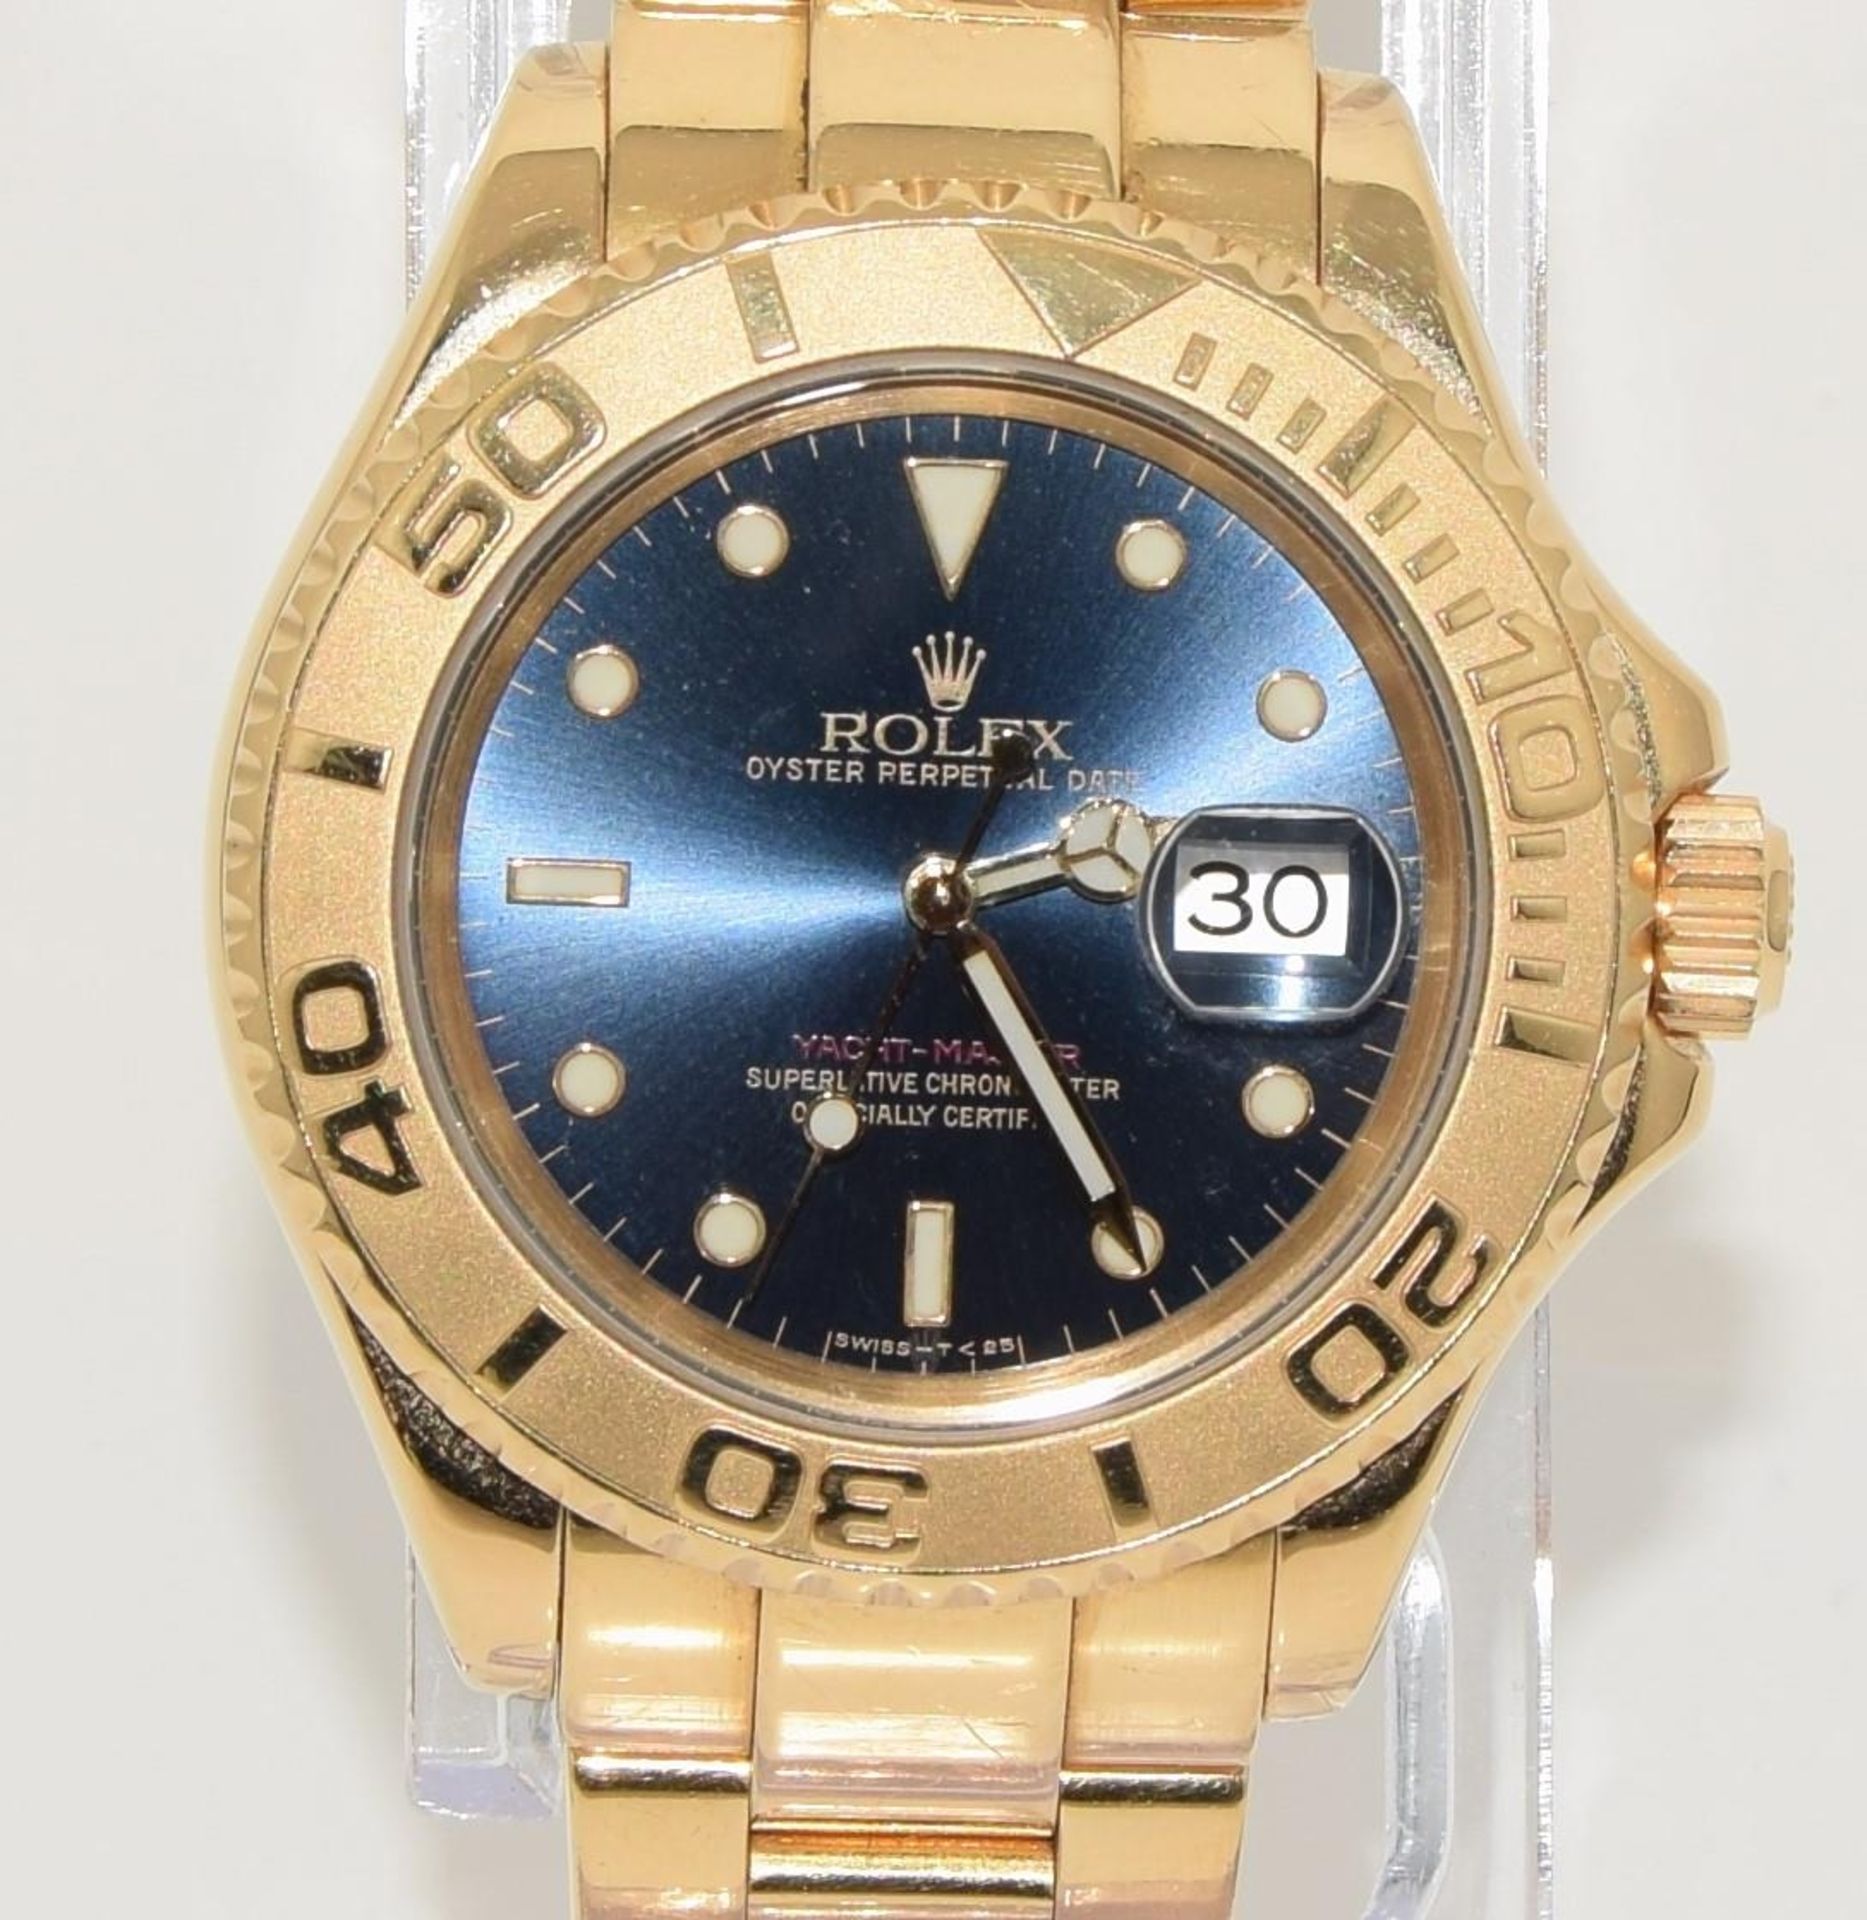 Rolex Yachtmaster 18ct gold model 16628. Electric blue face with Rolex service card and boxed. ( - Image 4 of 10